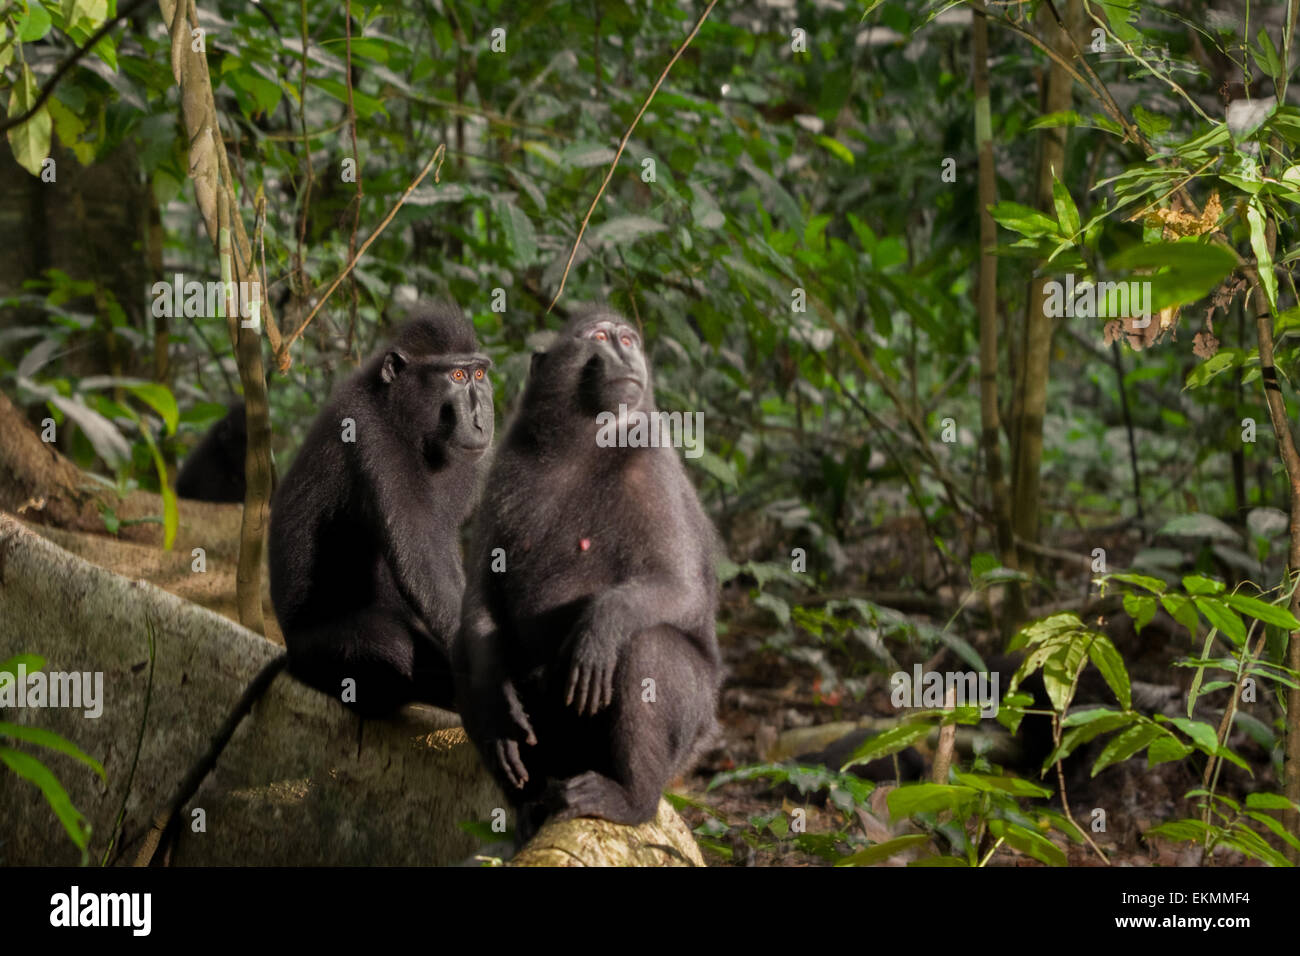 Two individuals of Sulawesi black-crested macaque (Macaca nigra) in Tangkoko Nature Reserve, North Sulawesi, Indonesia. Stock Photo